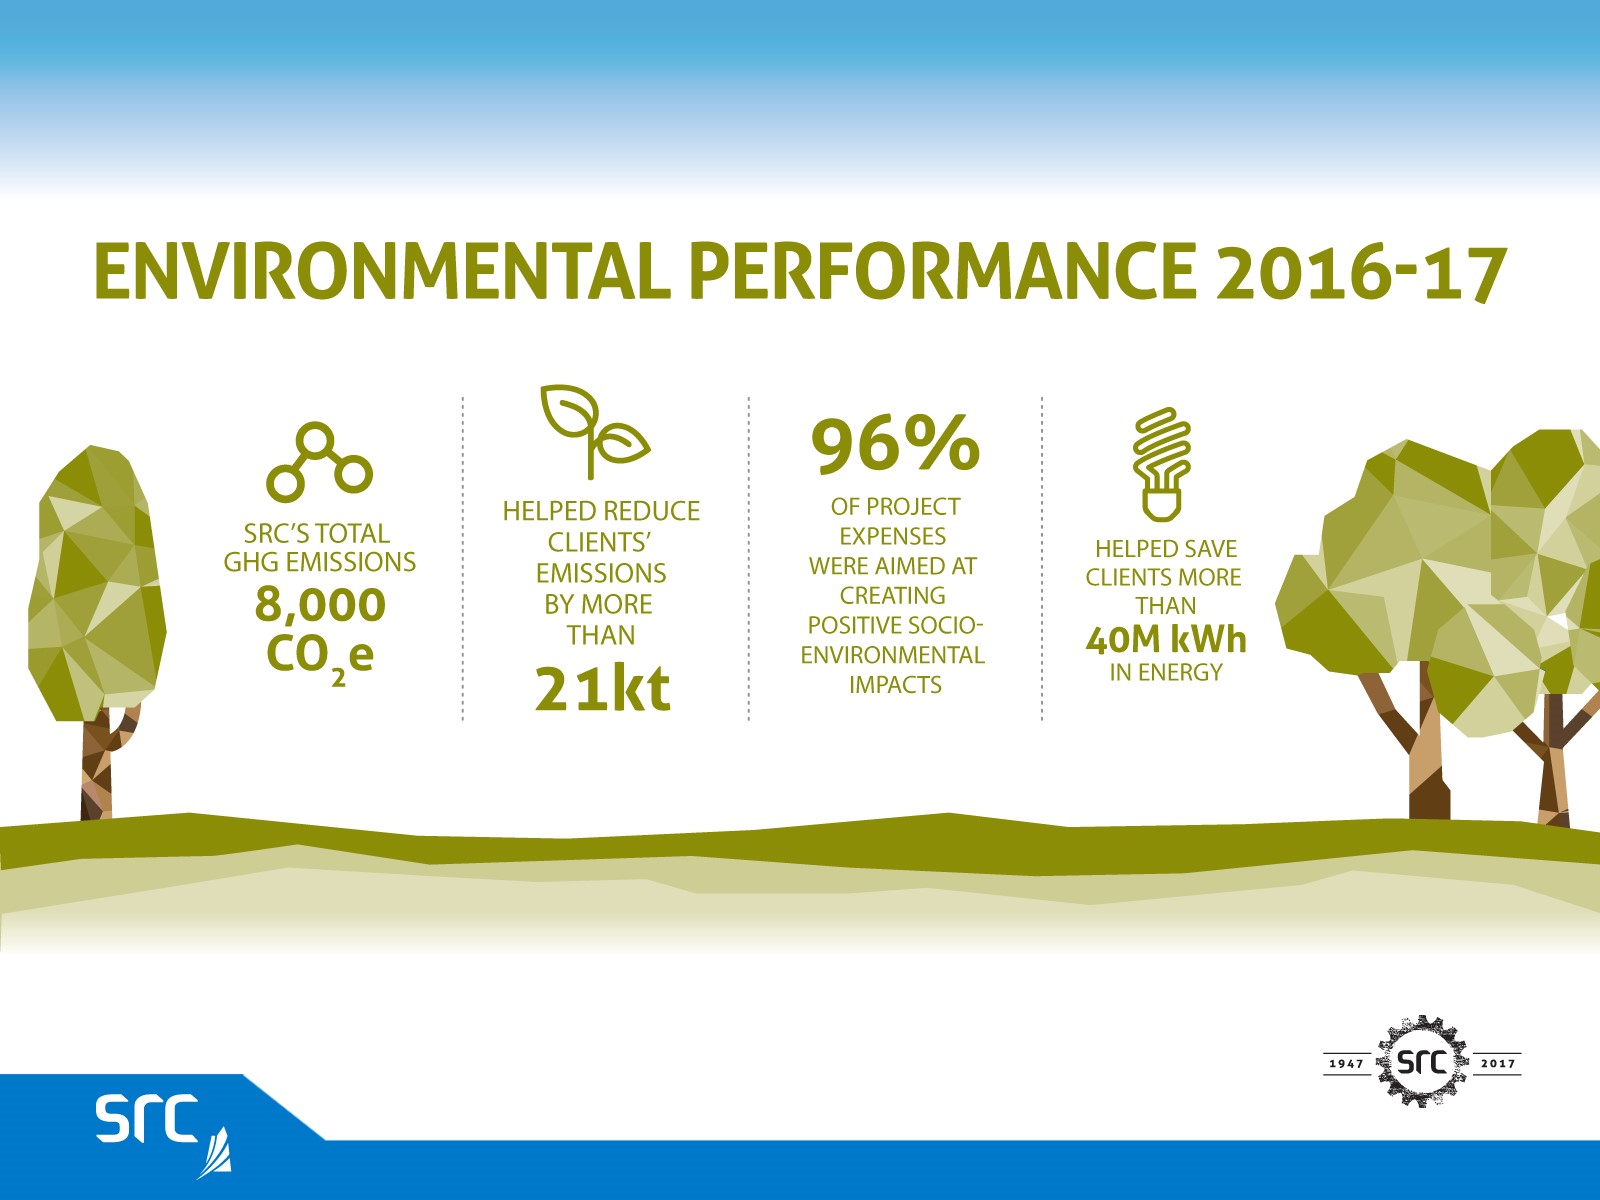 src's environmental impacts numbers